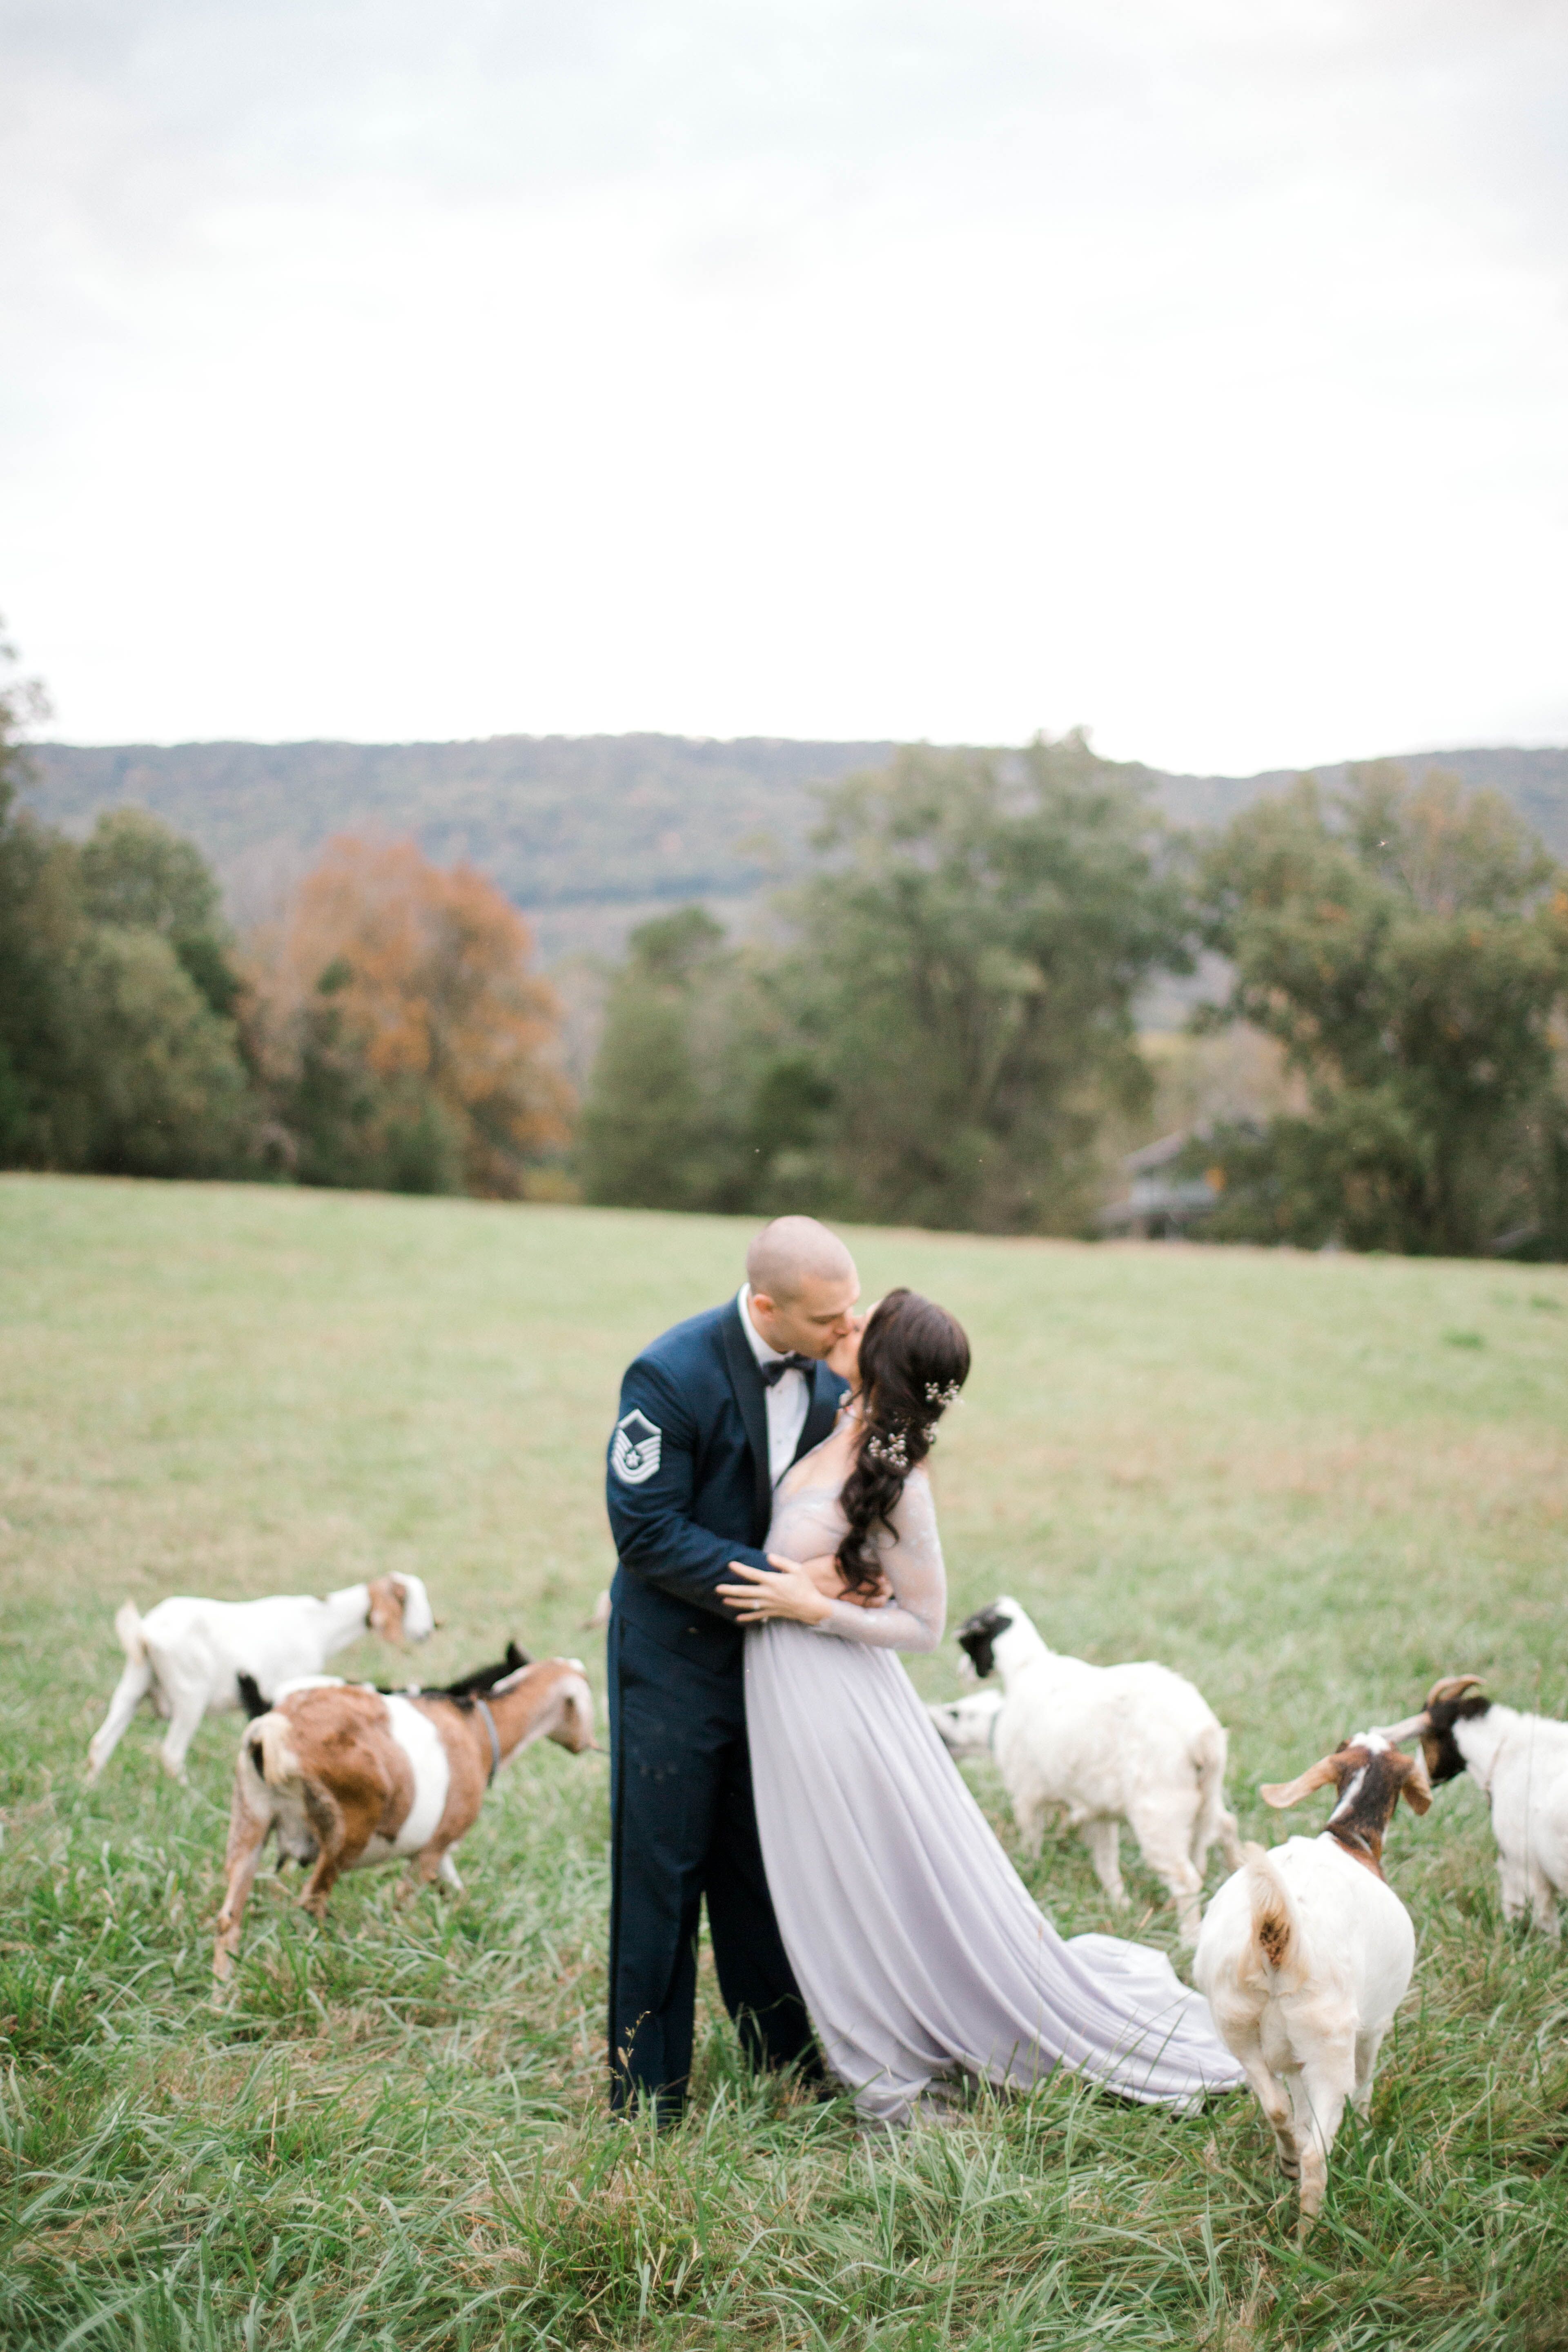 Couple Kissing in Rustic Field of Farm Animals